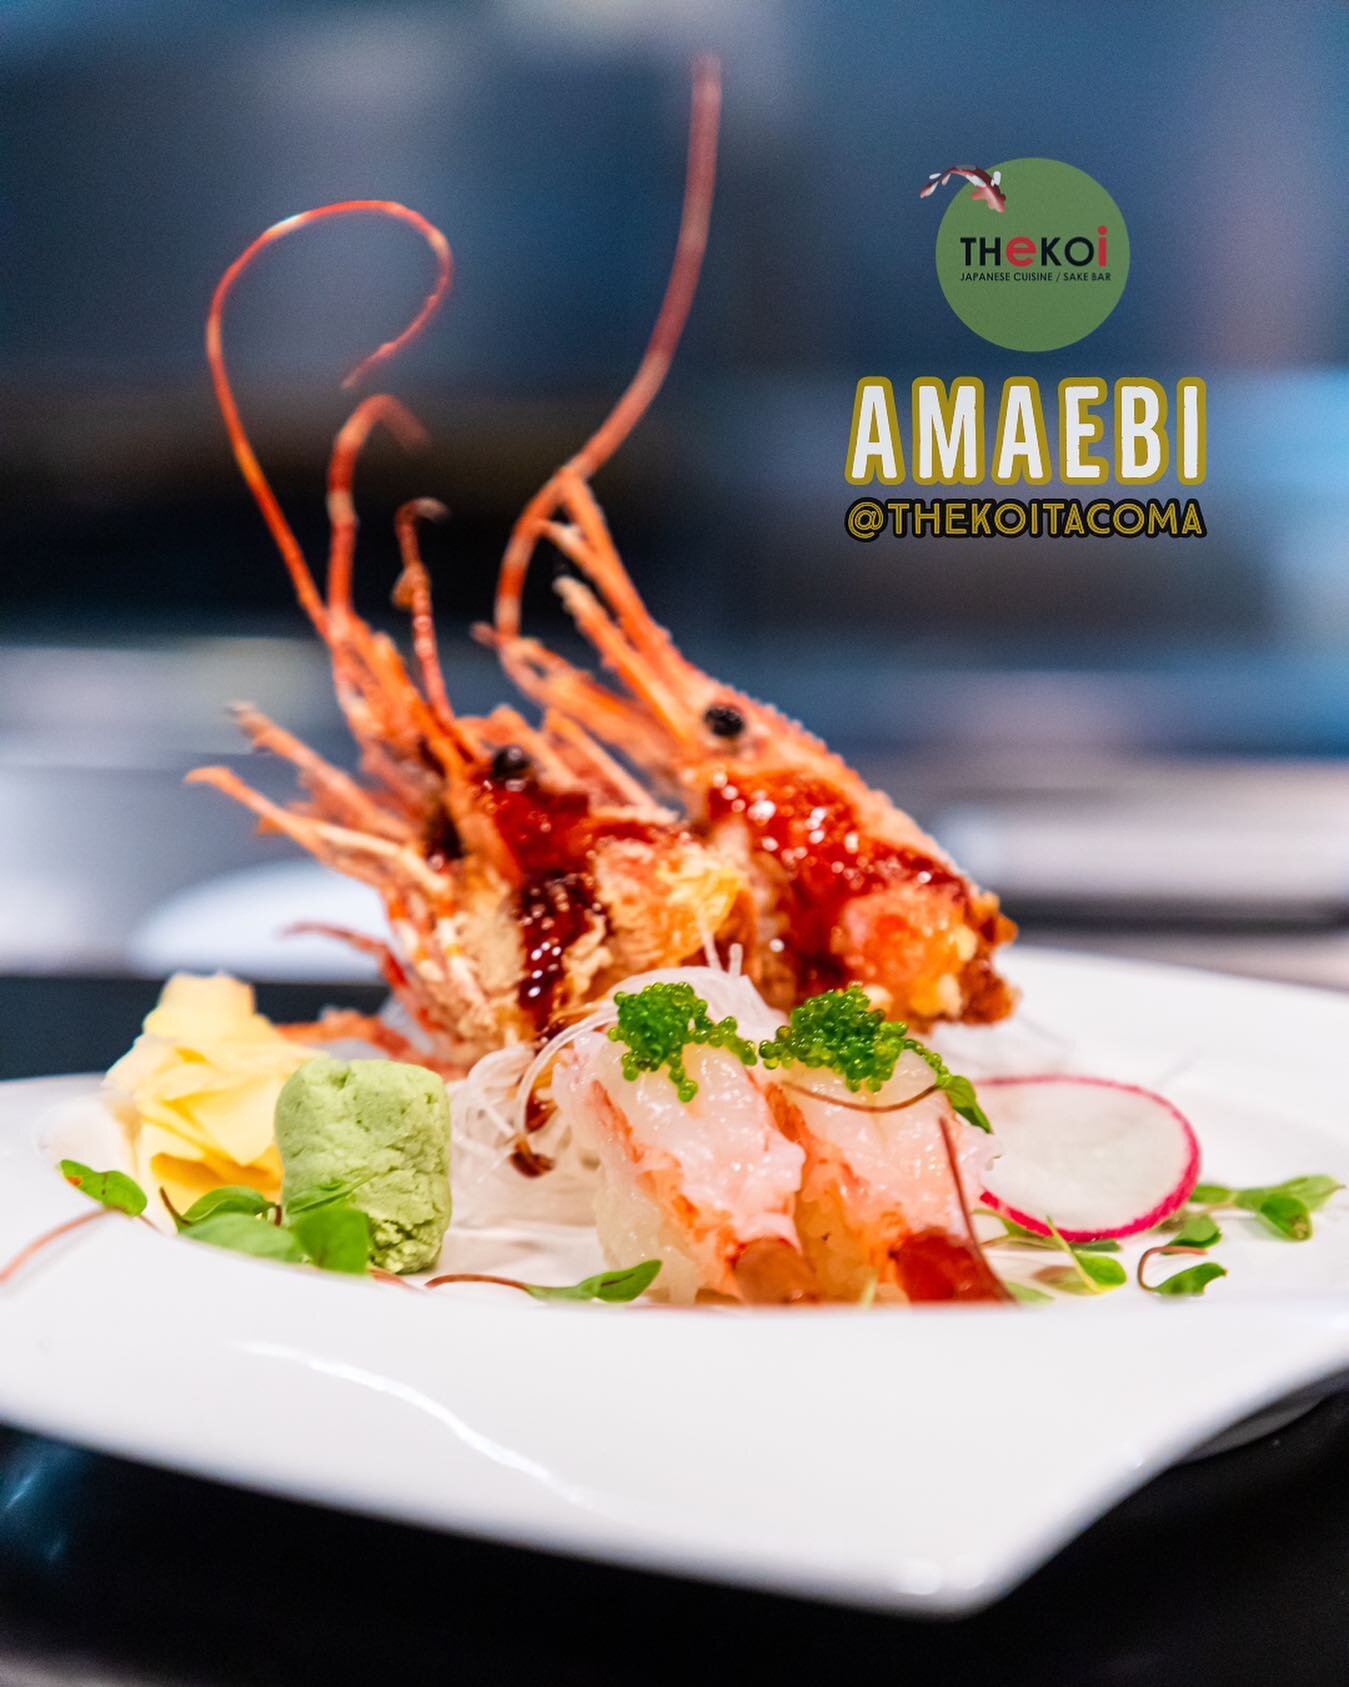 Lets get Exotic in Tacoma tonight 😍
AMAEBI aka Spot Prawns aka Sweet Shrimp 🦐
The Perfect way to get your Sushi 🍣 game next level
Served with its Head deep fried for all the Crunch
Dinner tonight at THEKOI 
Dine in again with us
Reservations at
th